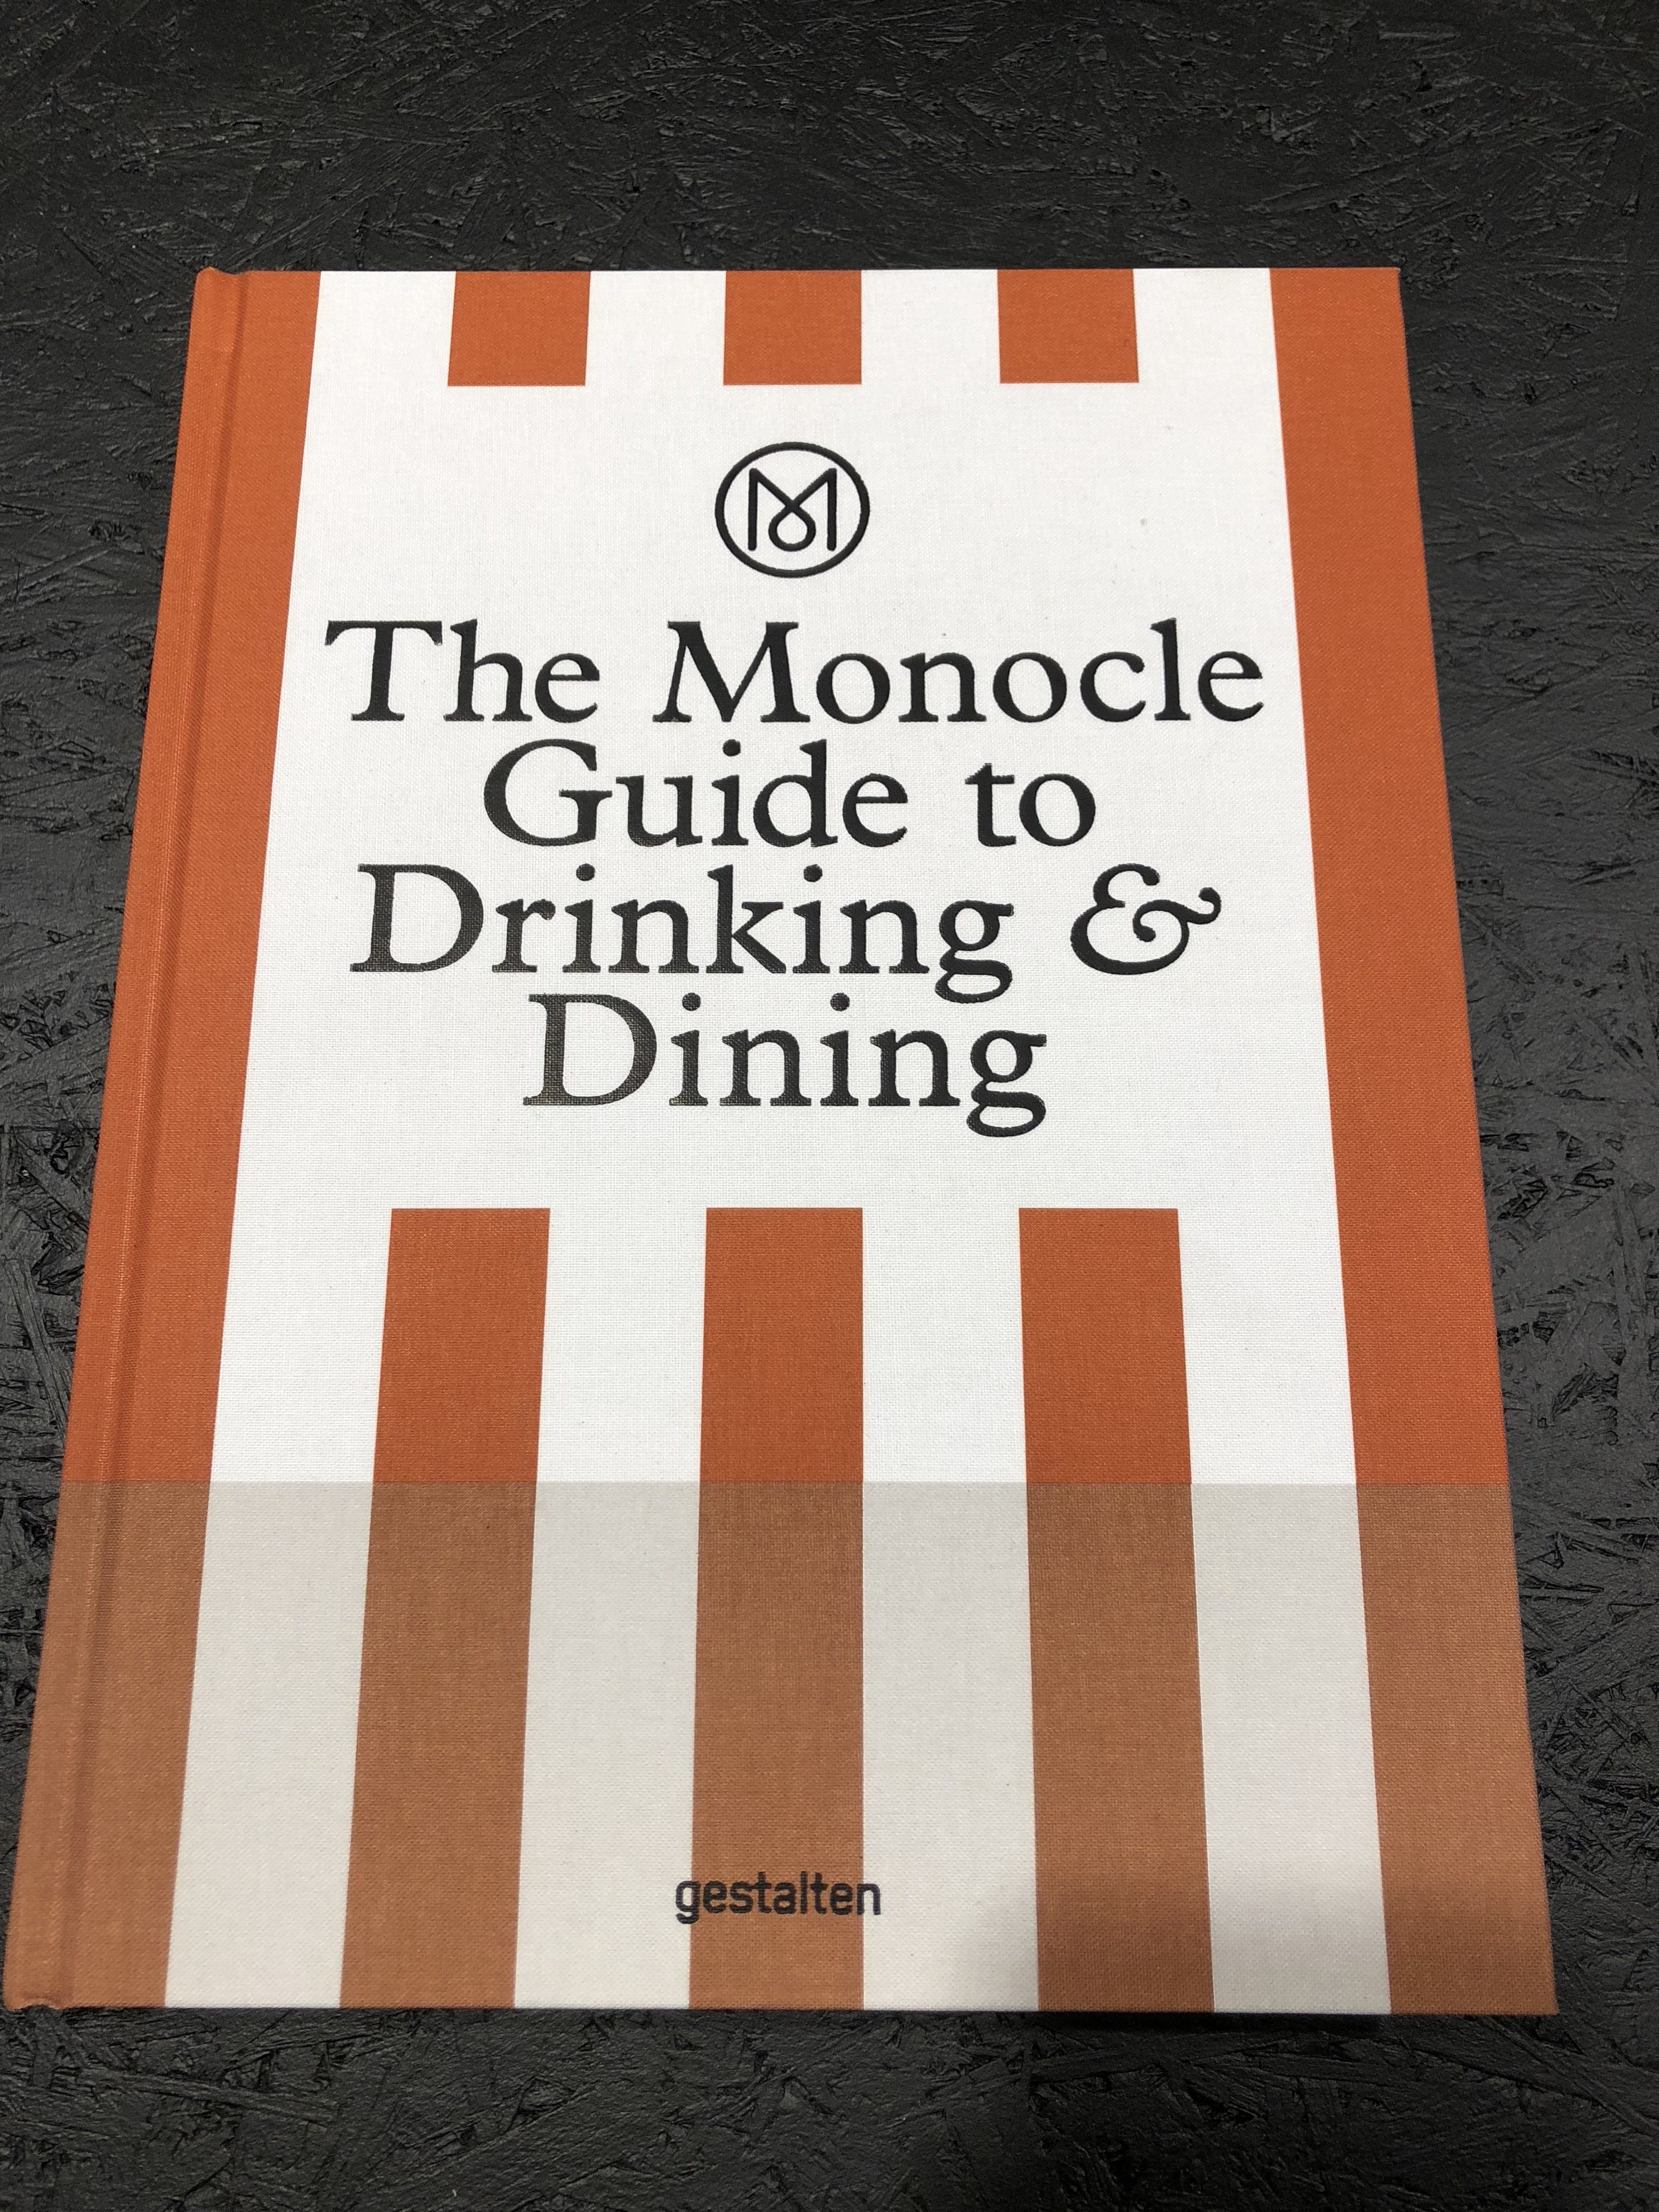 Drinking & Dining Guide Not Another Concept Store